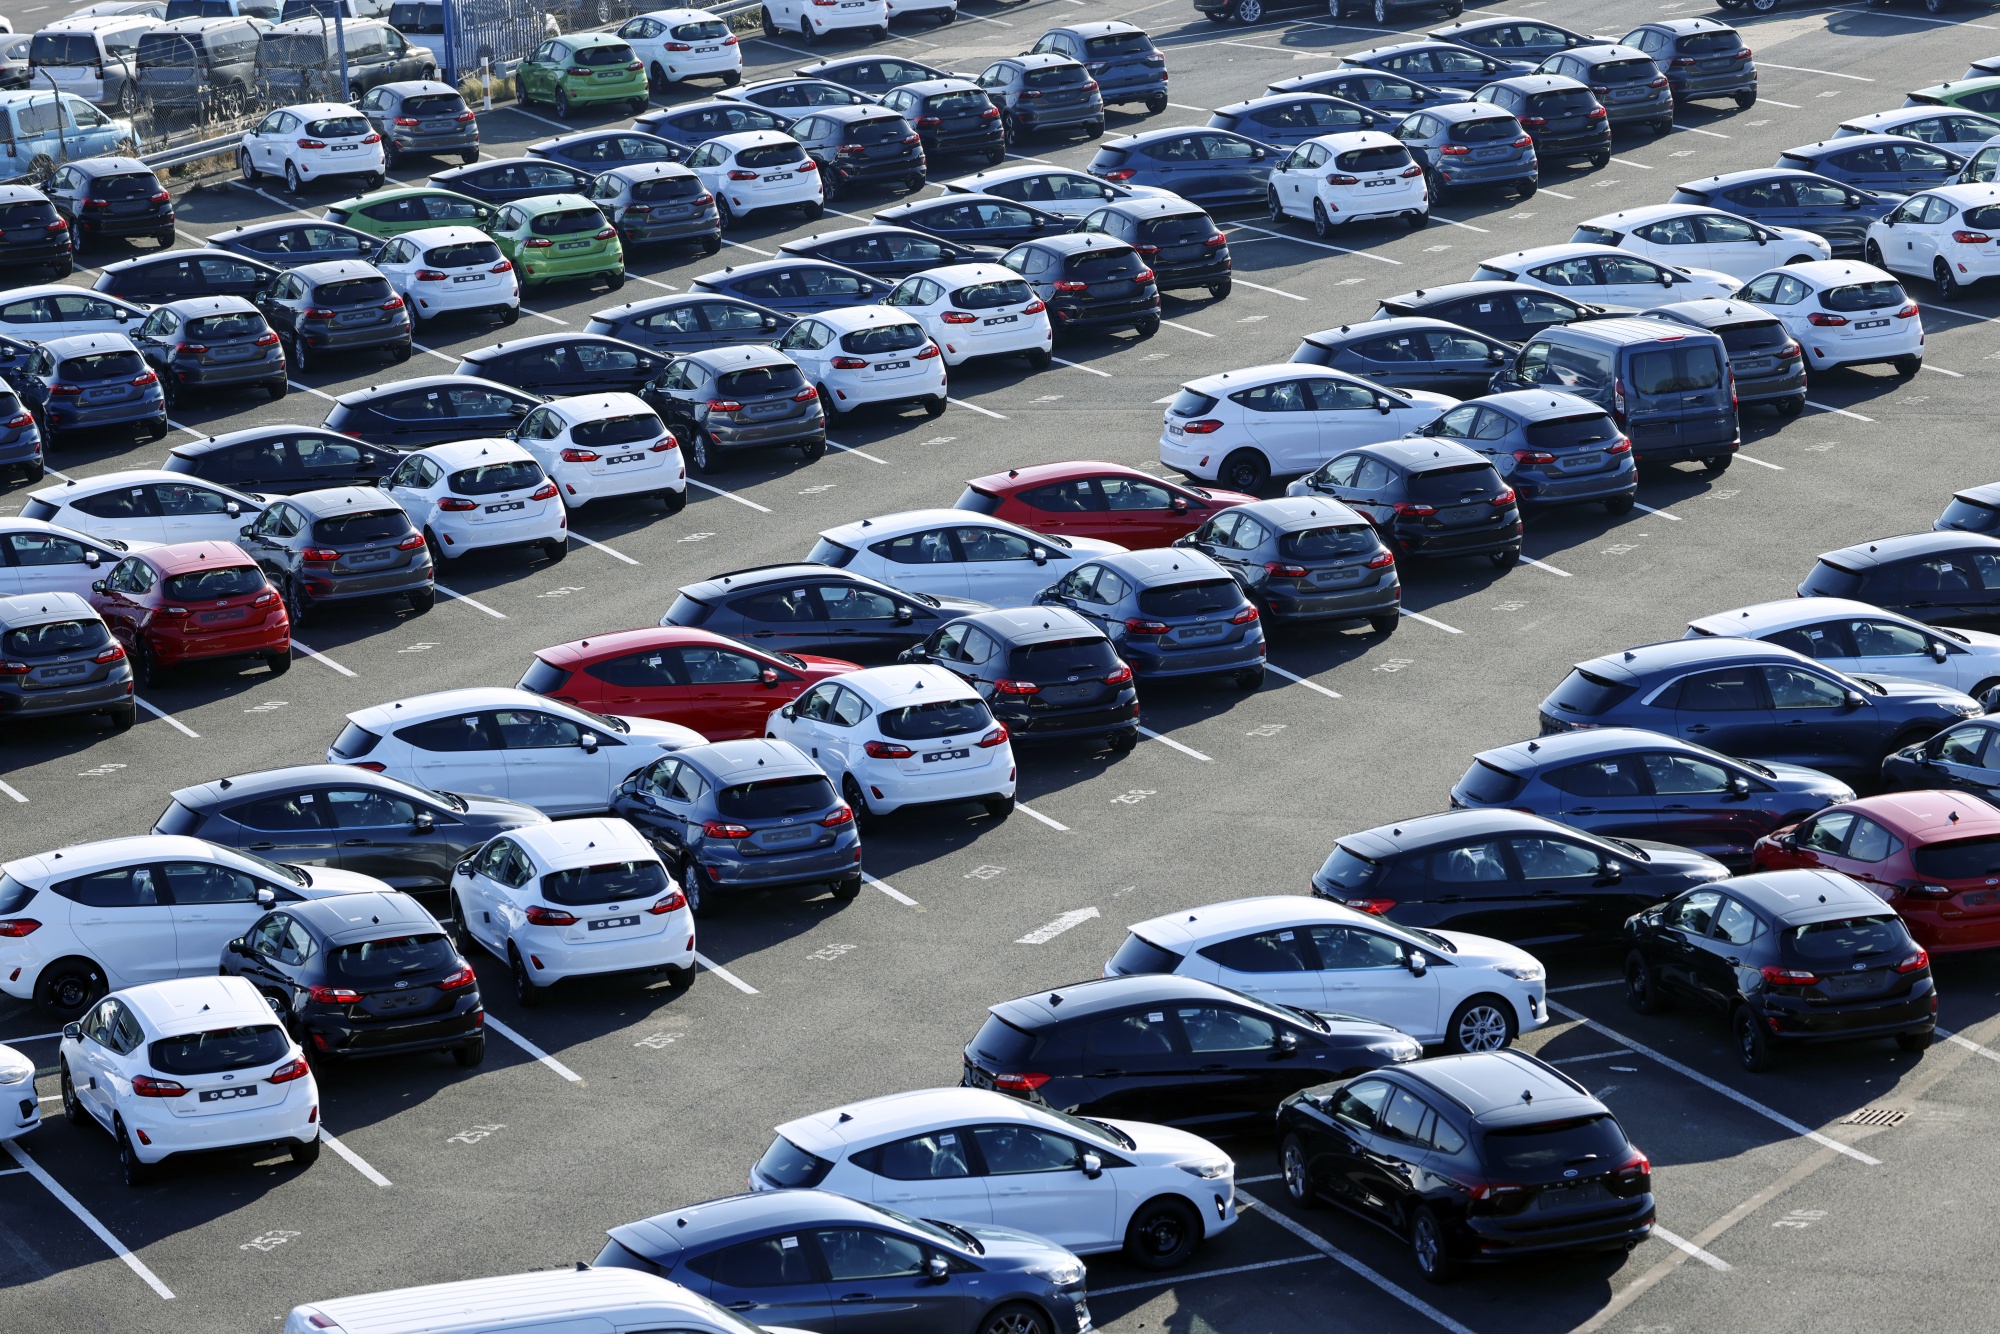 A surge in car buying and interest rates has strained finances and fueled an uptick in  automobile repossessions.